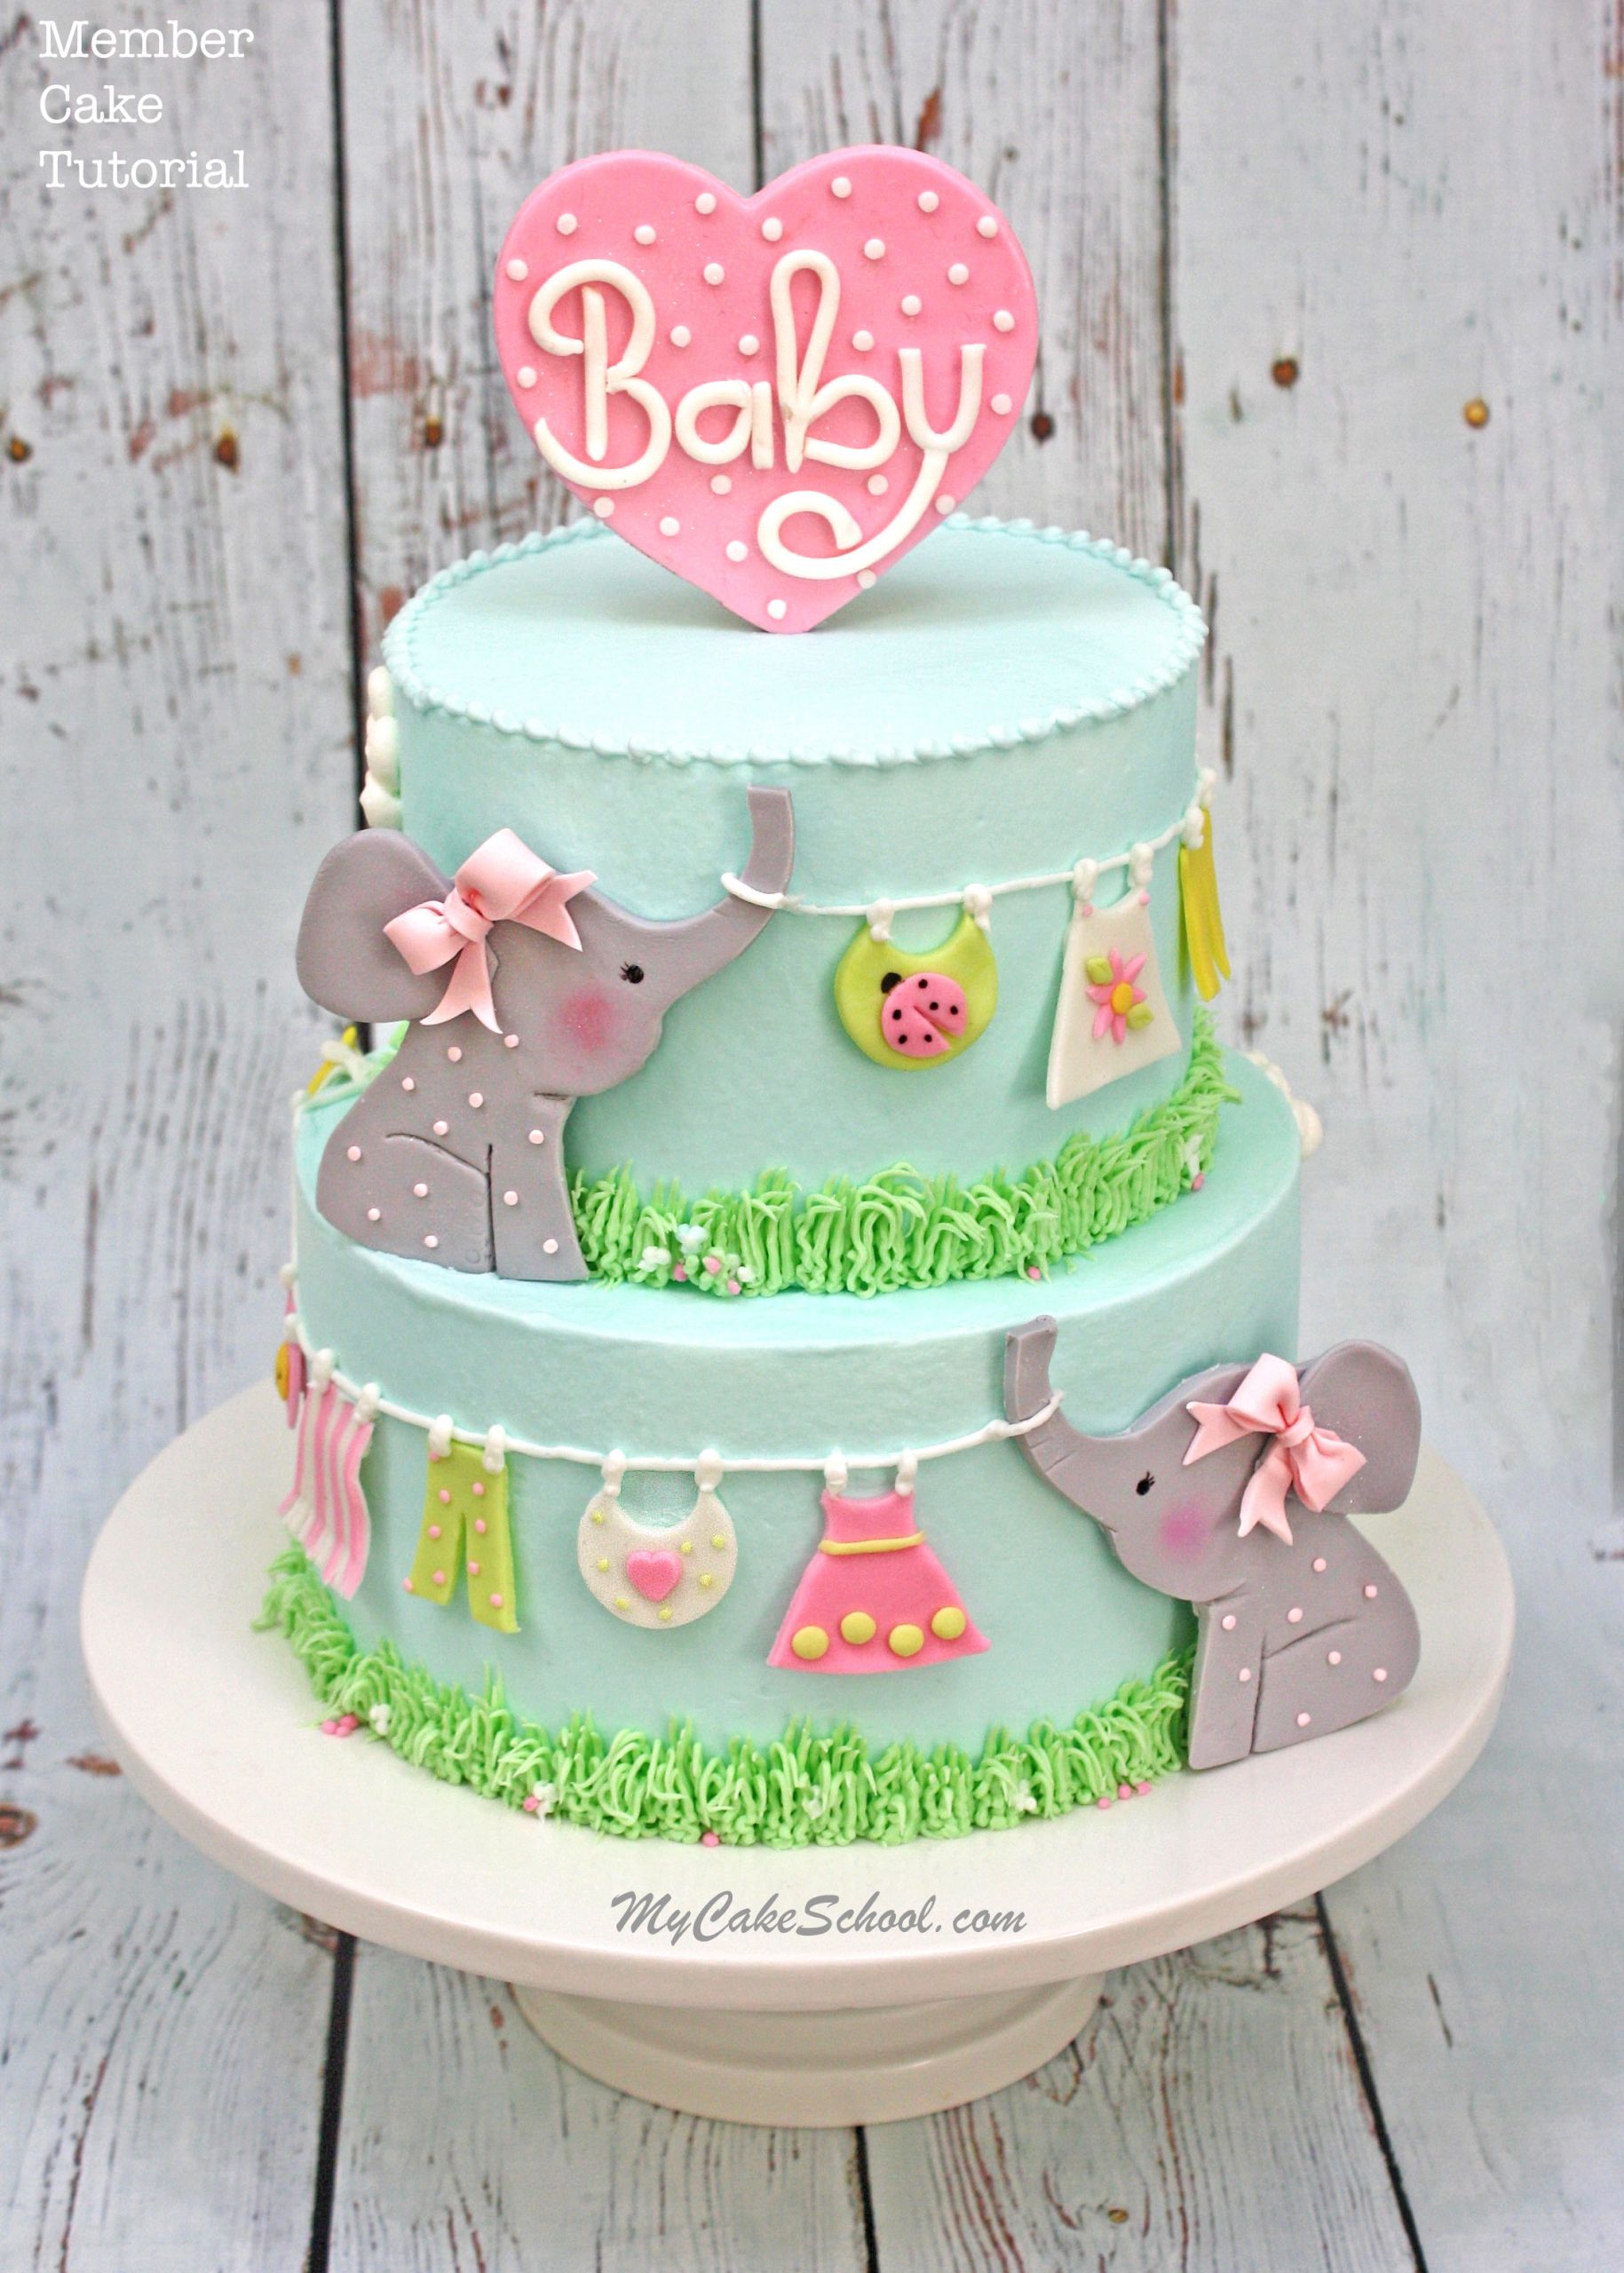 Baby Shower Cake Decor
 Roundup of the CUTEST Baby Shower Cakes Tutorials and